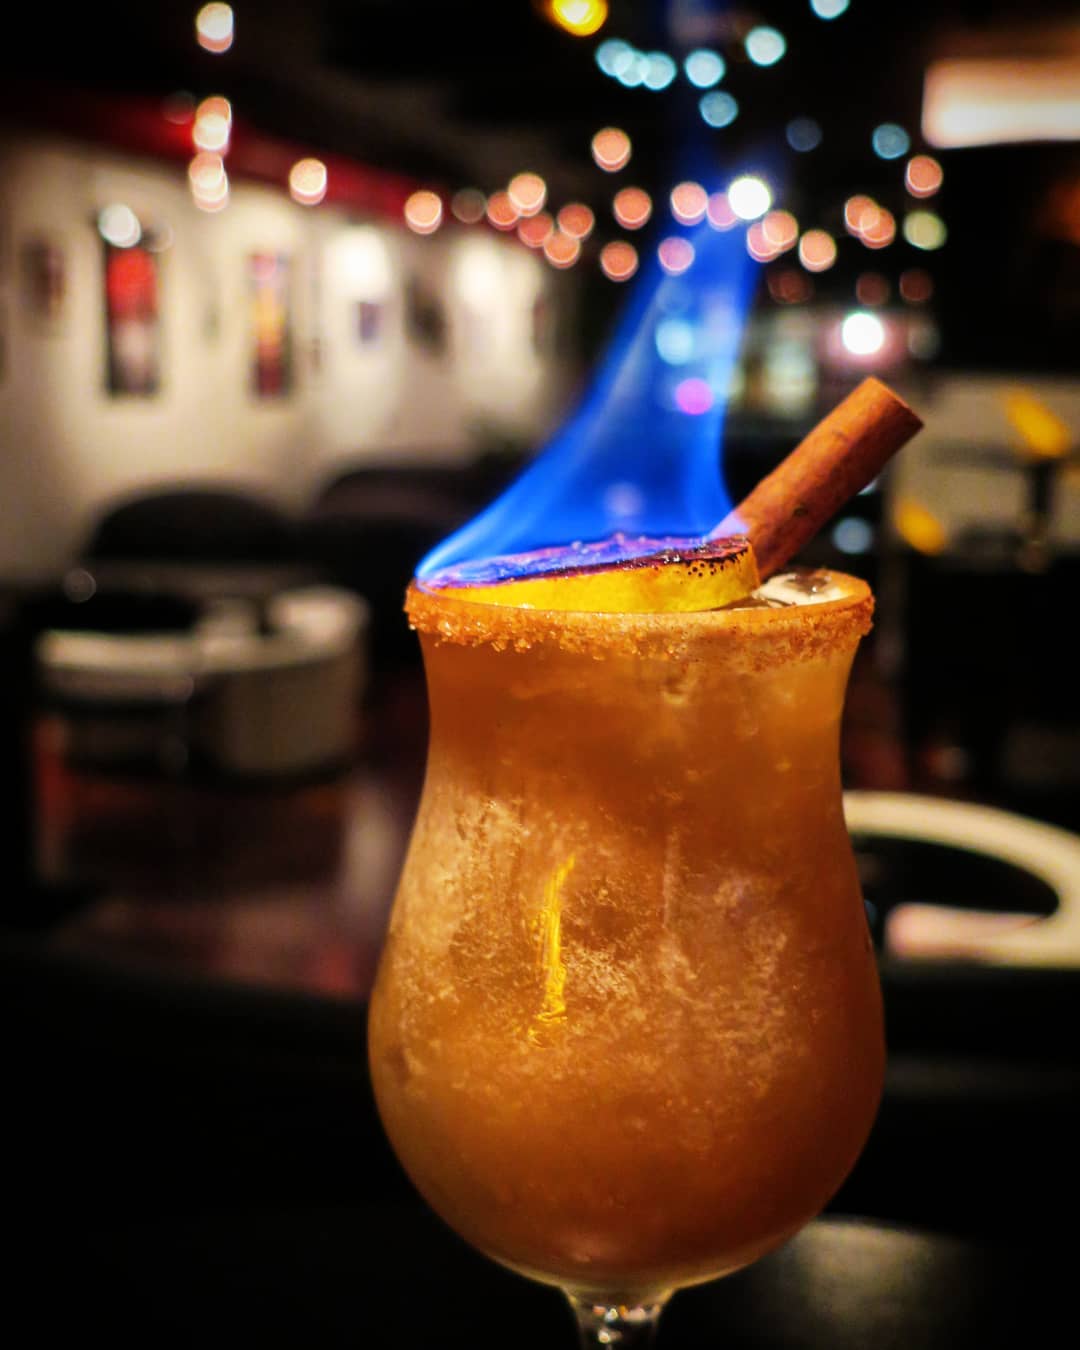 Rum drink in a hurricane glass with a cinnamon stick and piece of lemon on fire. Photo by Instagram user @mixtapepgh